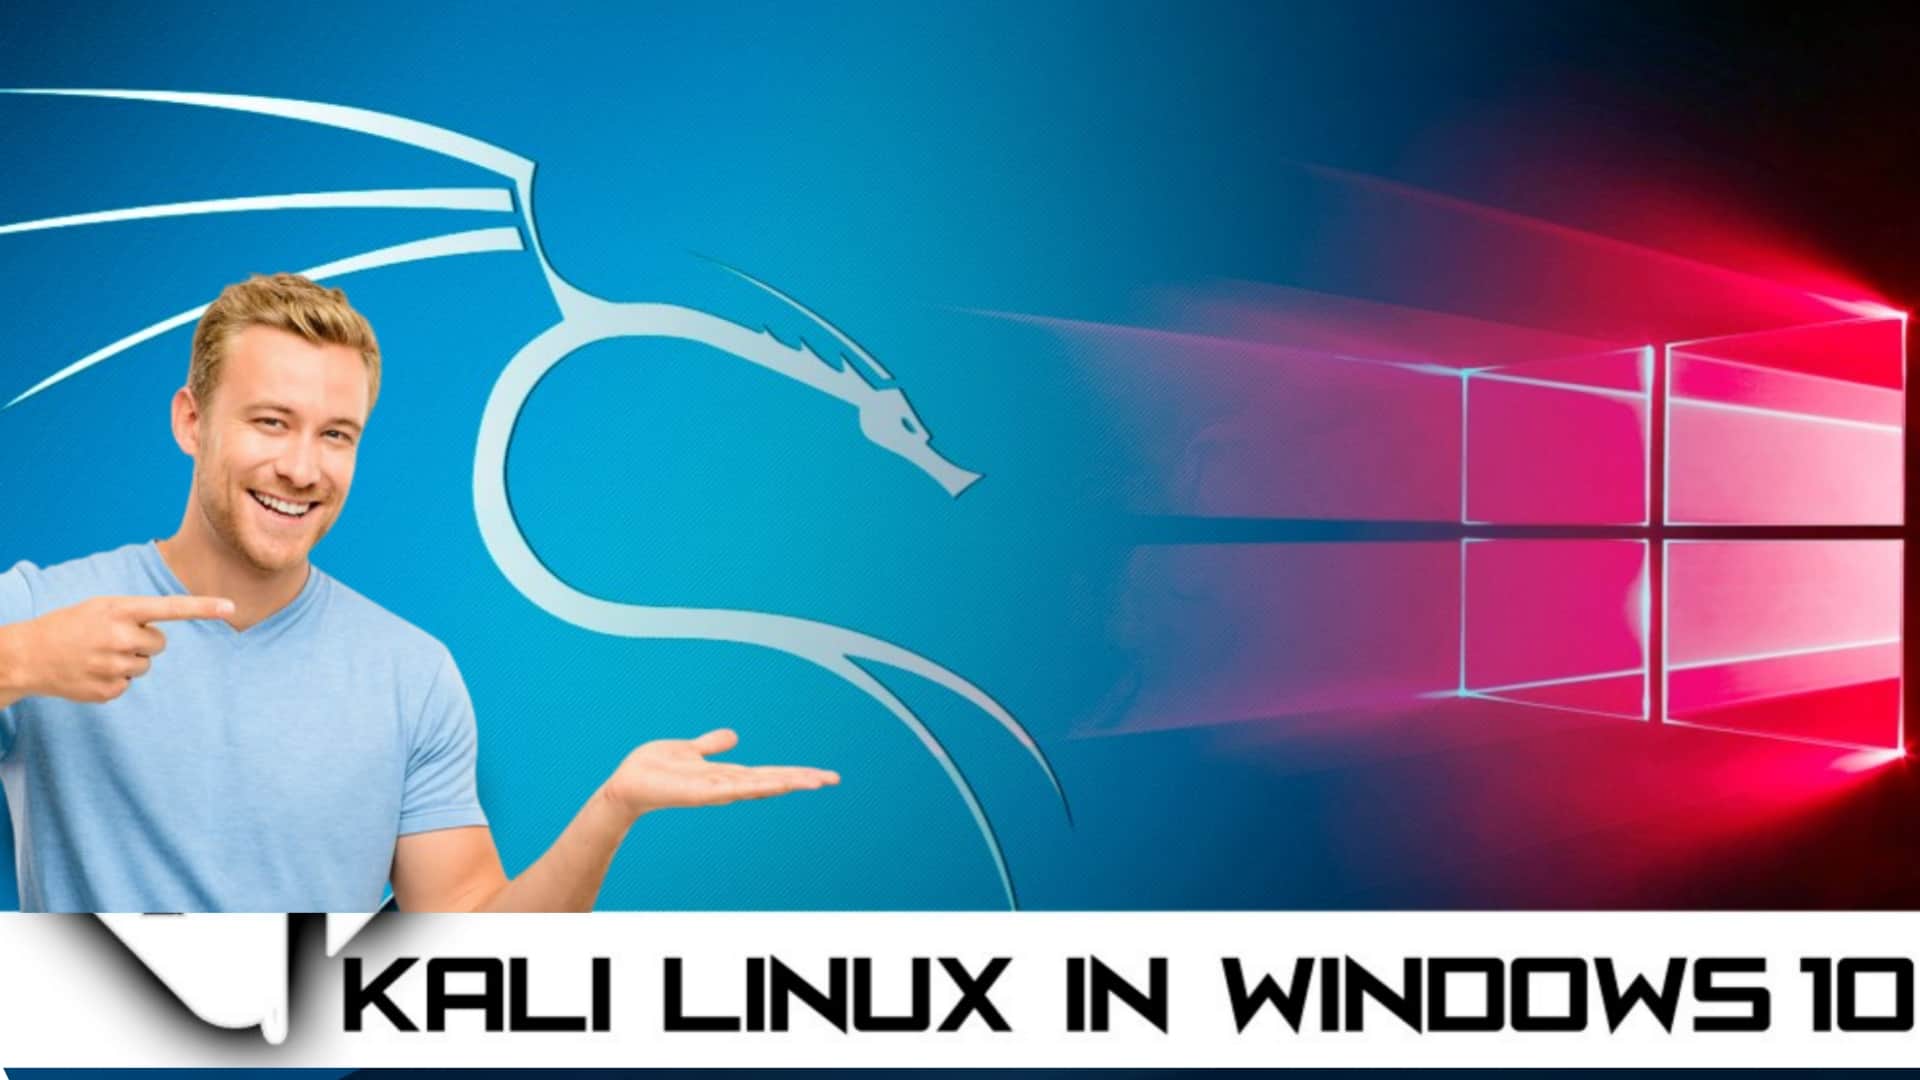 How to use Kali Linux in Windows 10 - Windows Subsystem for Linux